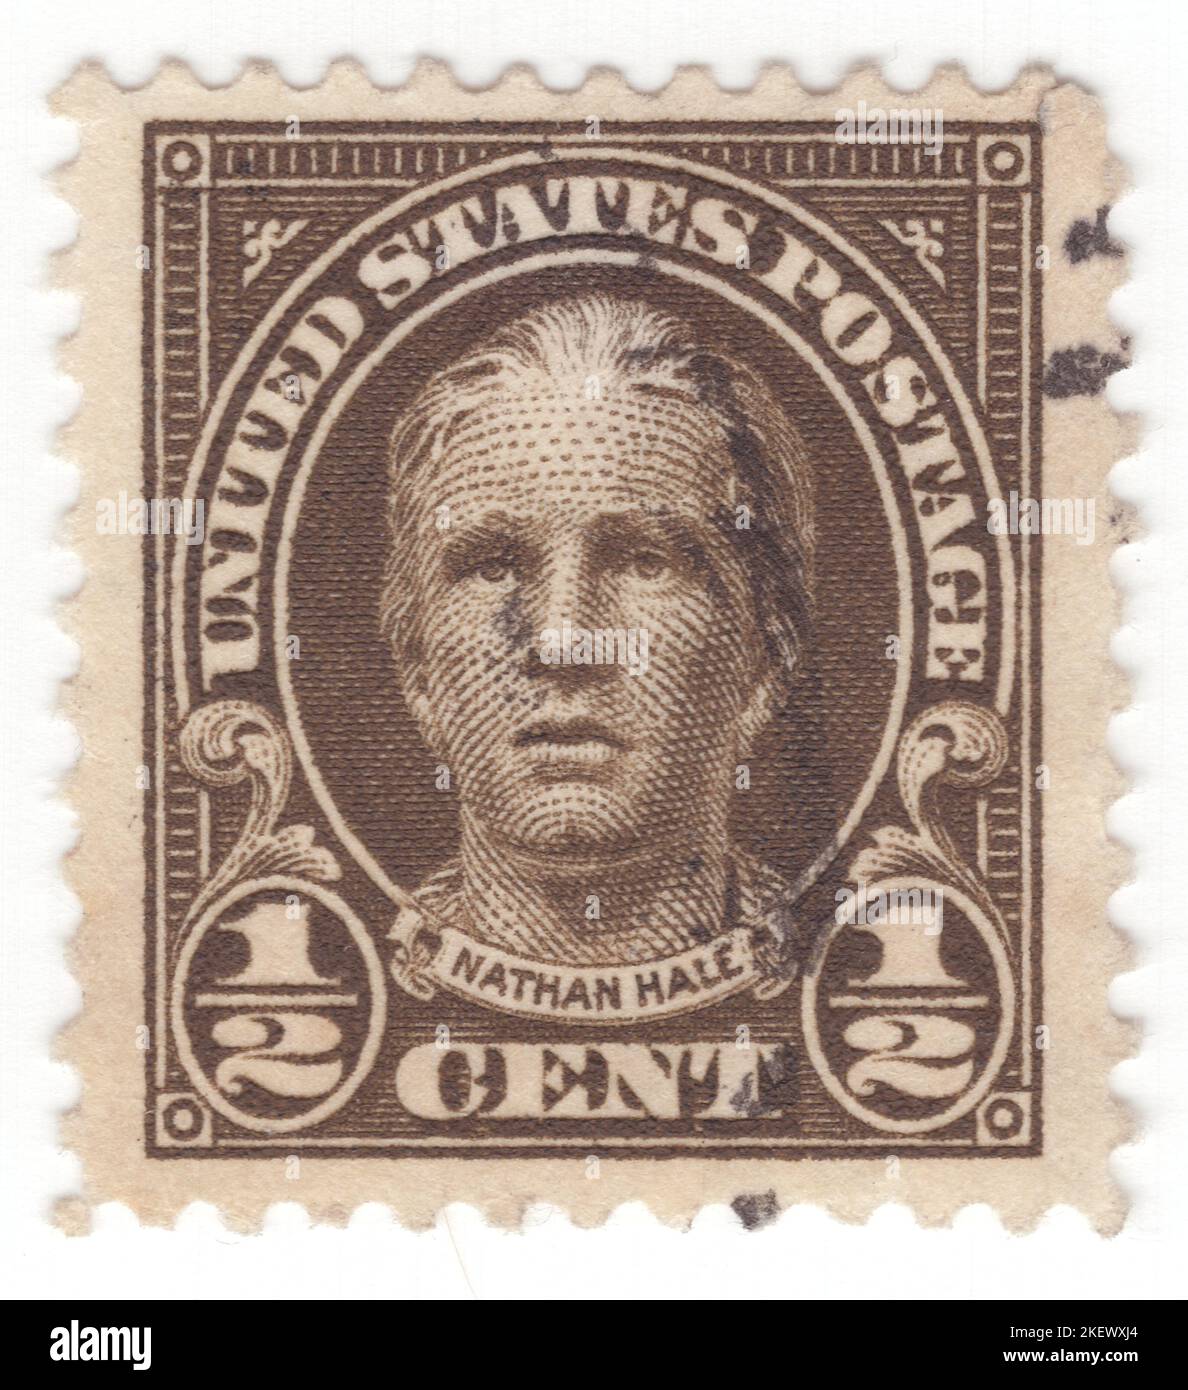 USA - 1925: An ½ cent olive-brown postage stamp depicting portrait of Nathan Hale. American Patriot, soldier and spy for the Continental Army during the American Revolutionary War, likeness is from a statue by Bela Lyon Pratt. He volunteered for an intelligence-gathering mission in New York City but was captured by the British and executed. Hale is considered an American hero and in 1985 was officially designated the state hero of Connecticut Stock Photo